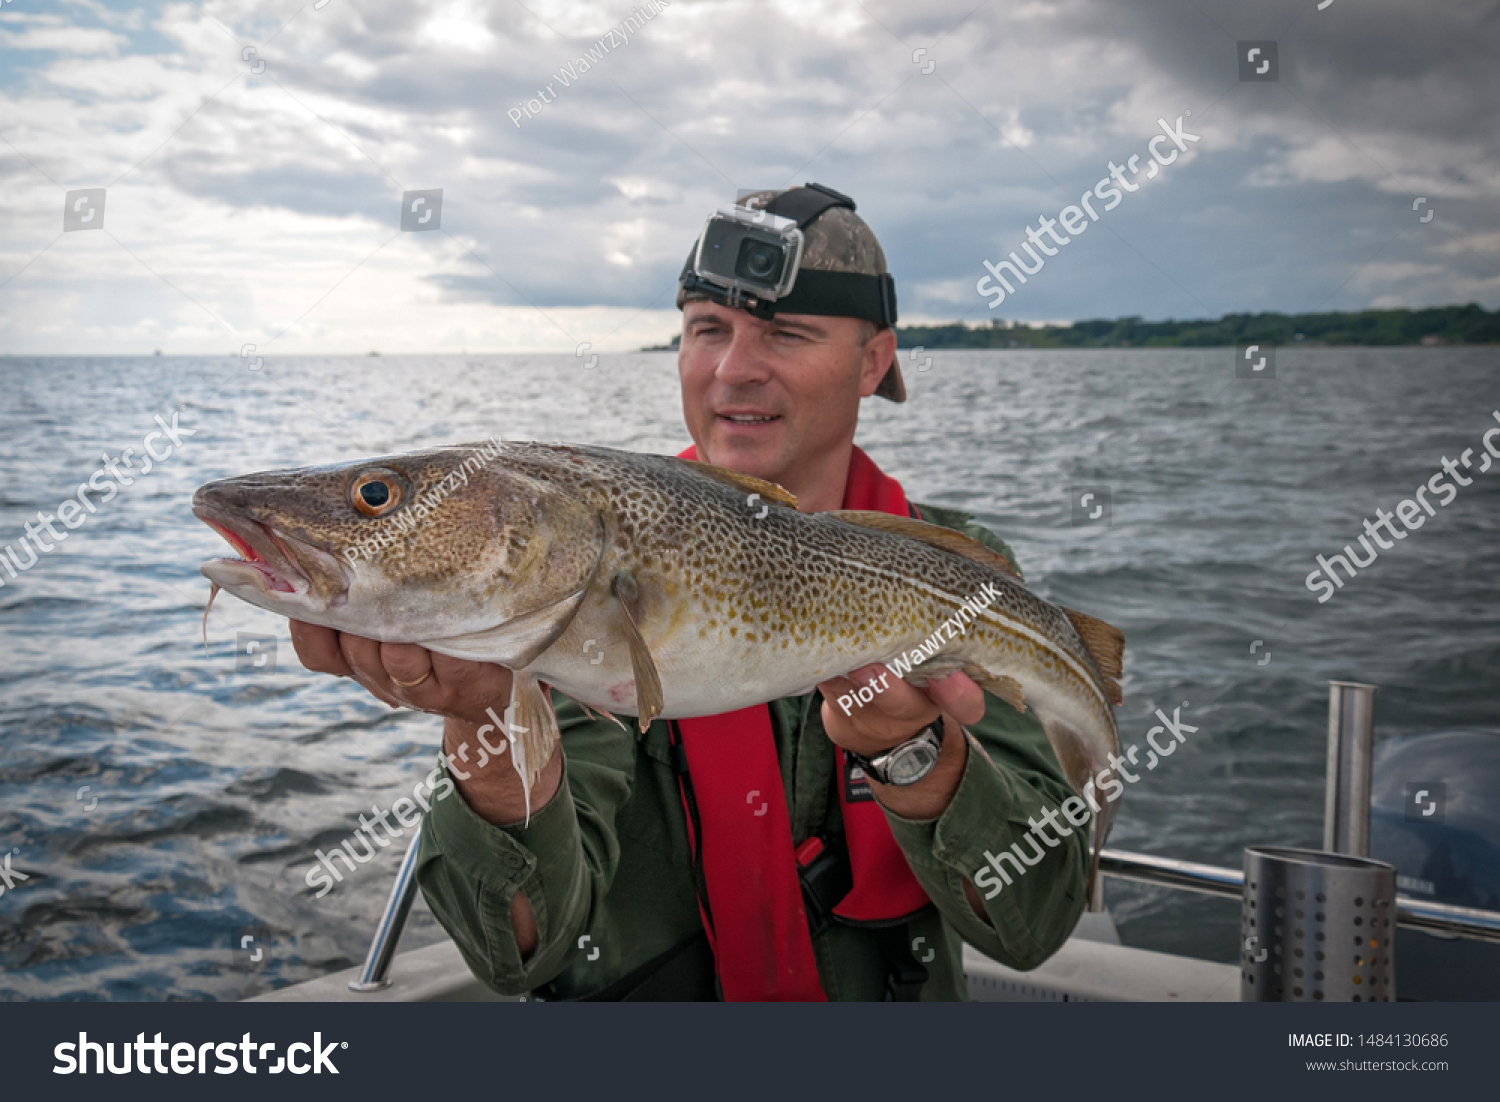 Happy angler with cod fishing trophy #1484130686